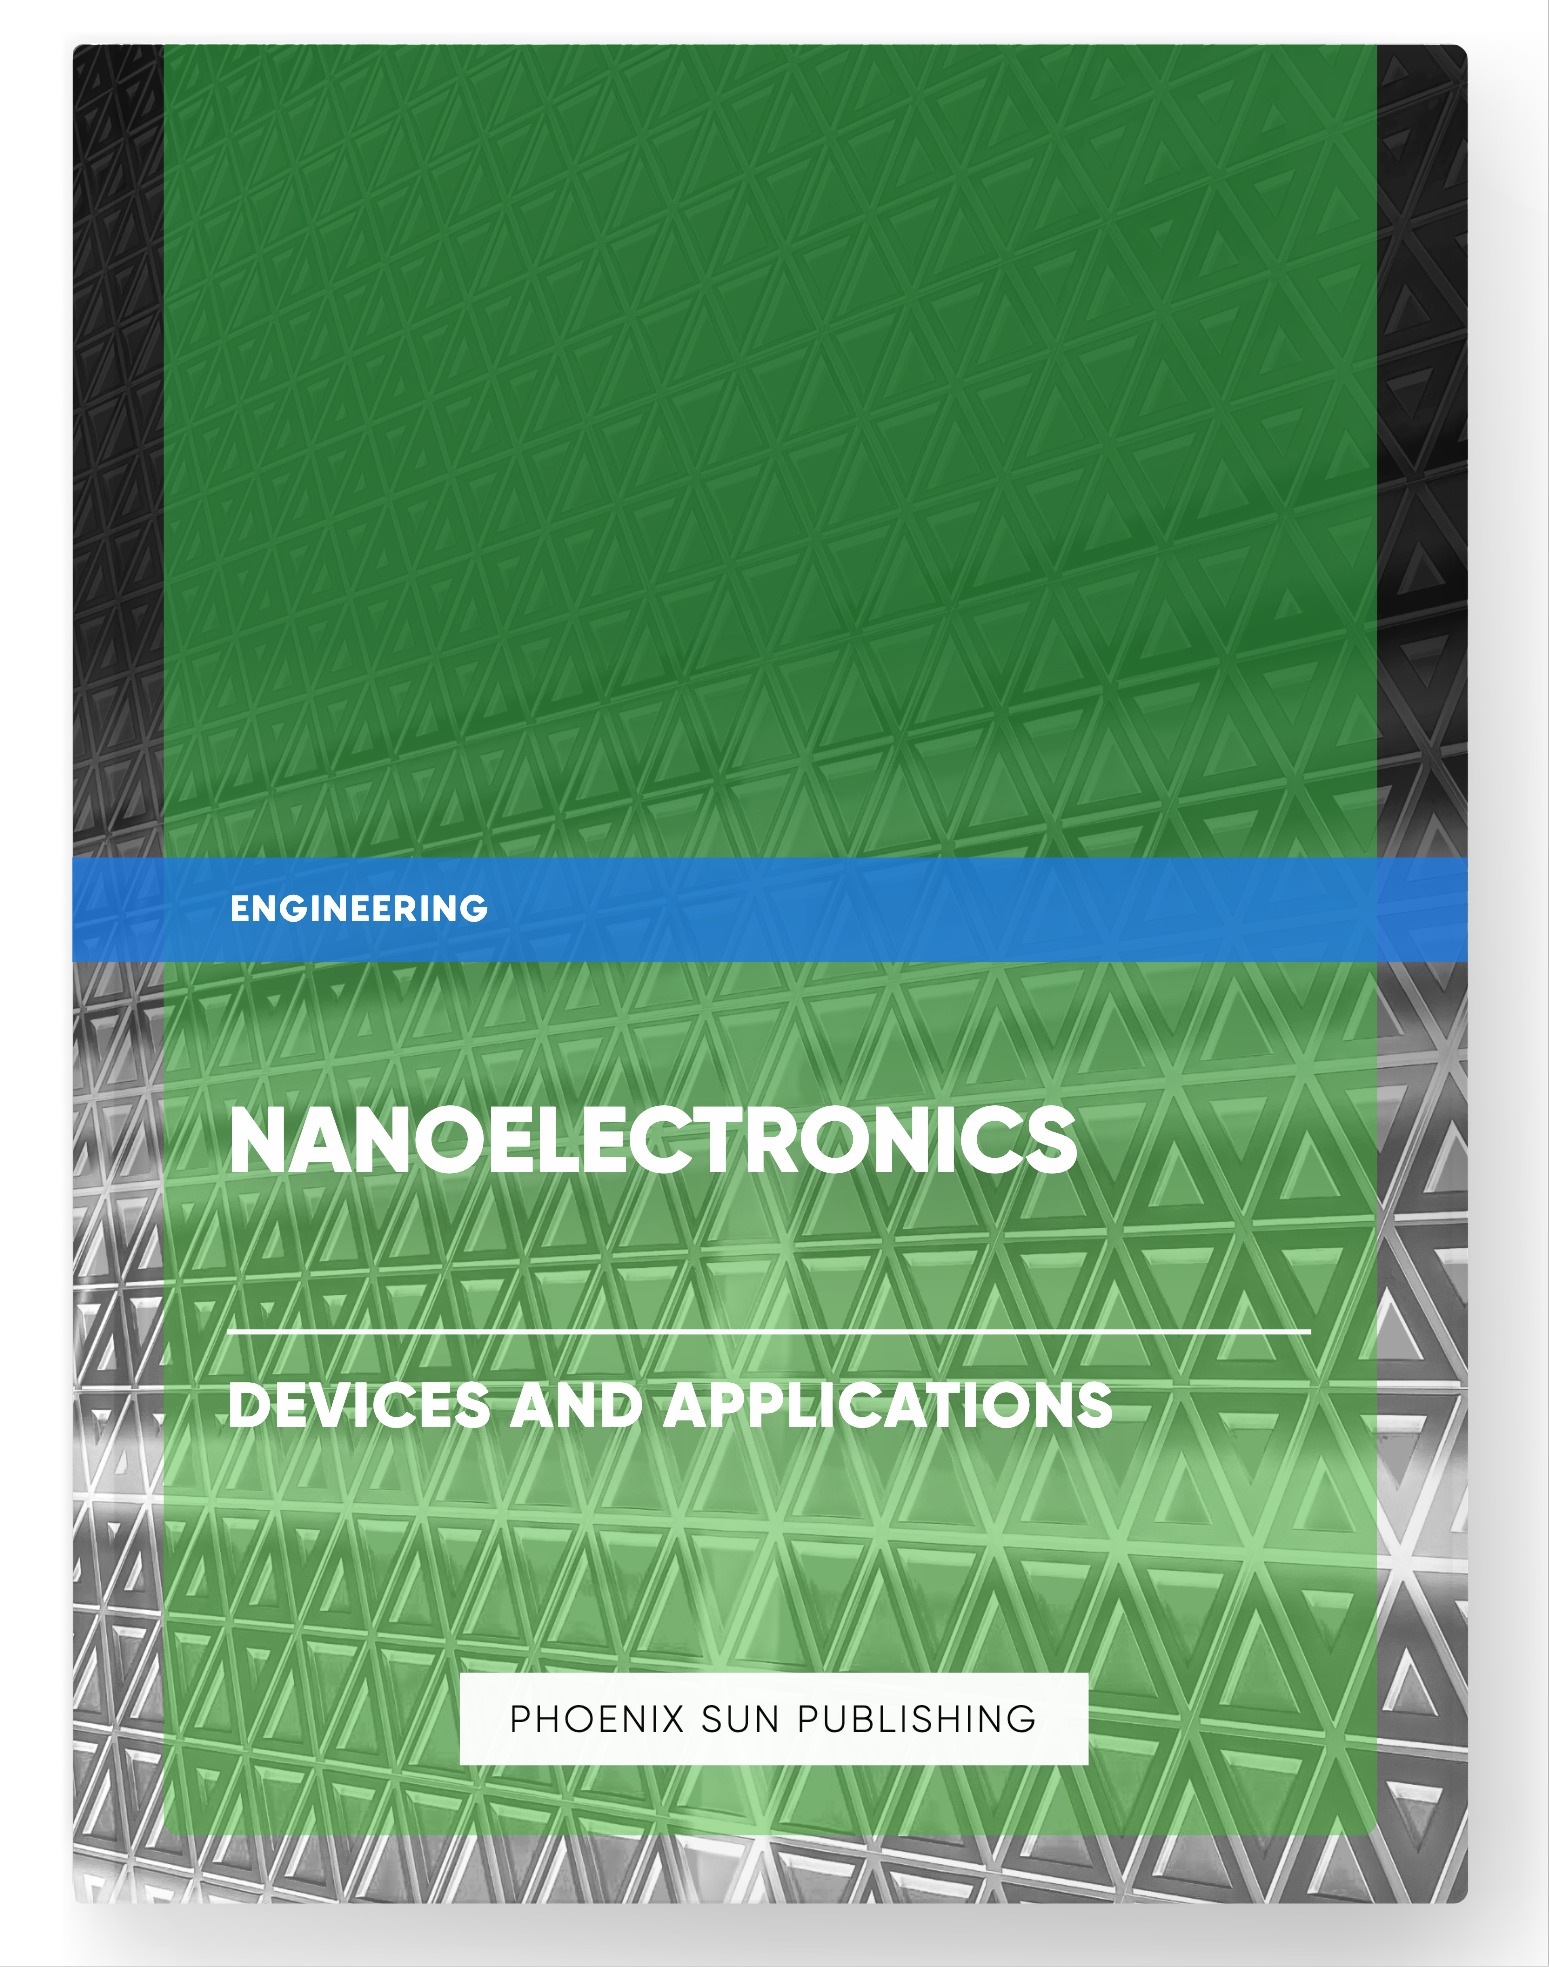 Nanoelectronics – Devices and Applications